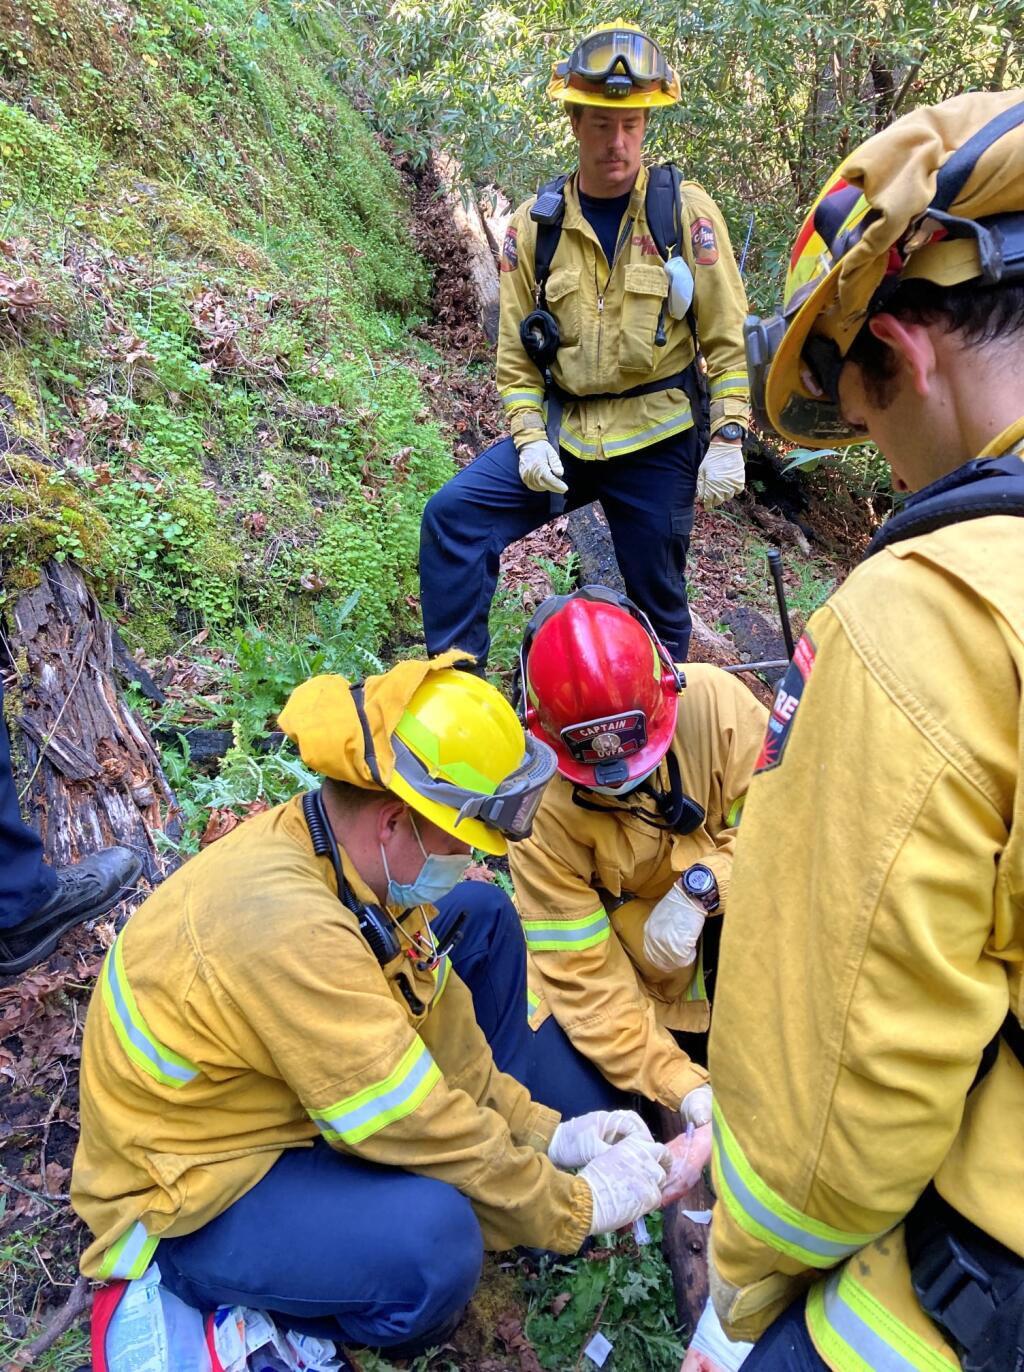 A crew with Henry 1 assisted Ukiah Valley Fire Authority and Cal Fire in rescuing a woman from the Montgomery Woods State Natural Reserve. (Sonoma County Sheriff’s Office / Facebook)